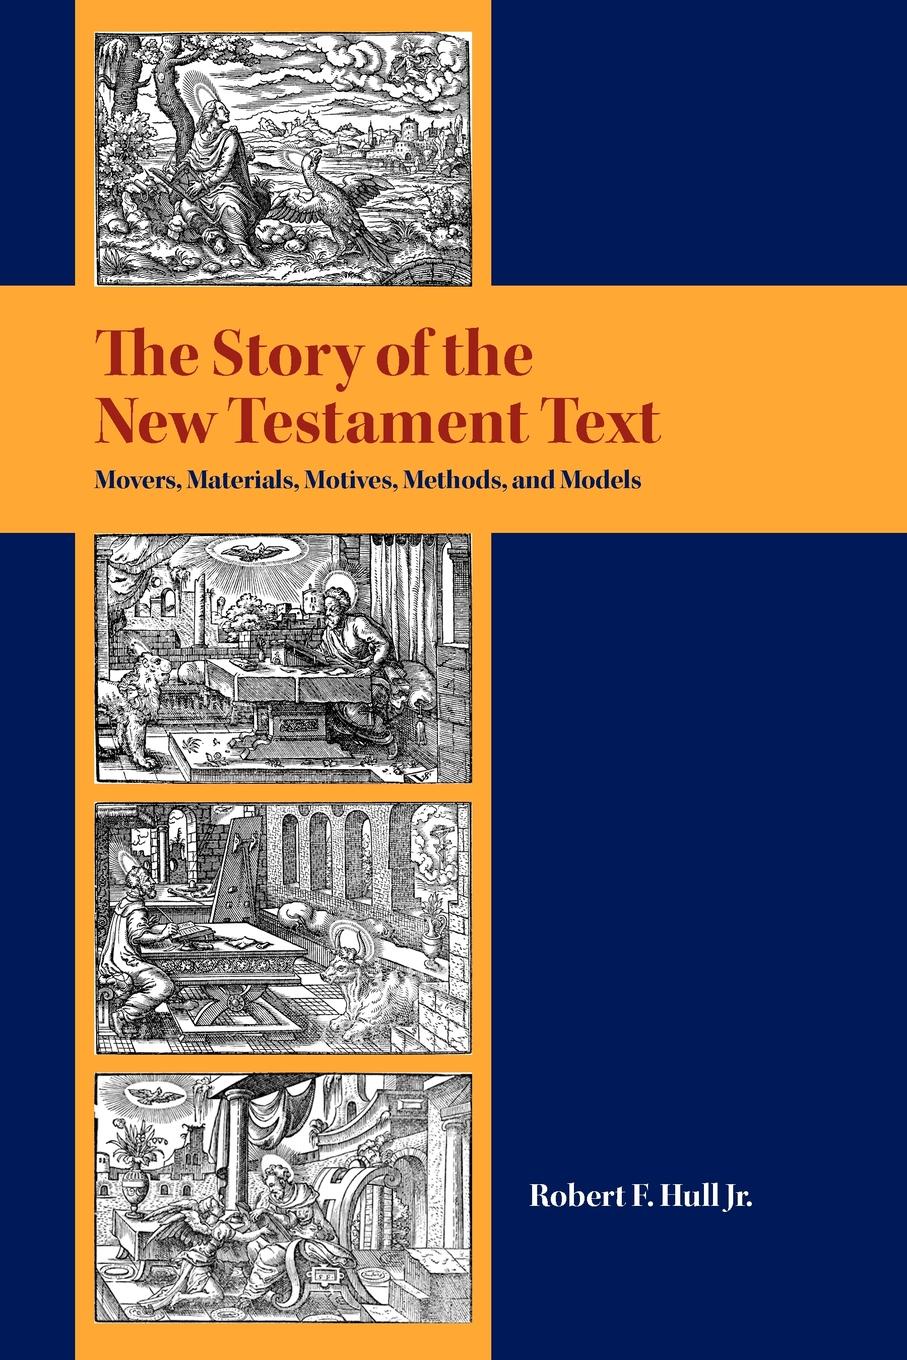 The Story of the New Testament Text. Movers, Materials, Motives, Methods, and Models